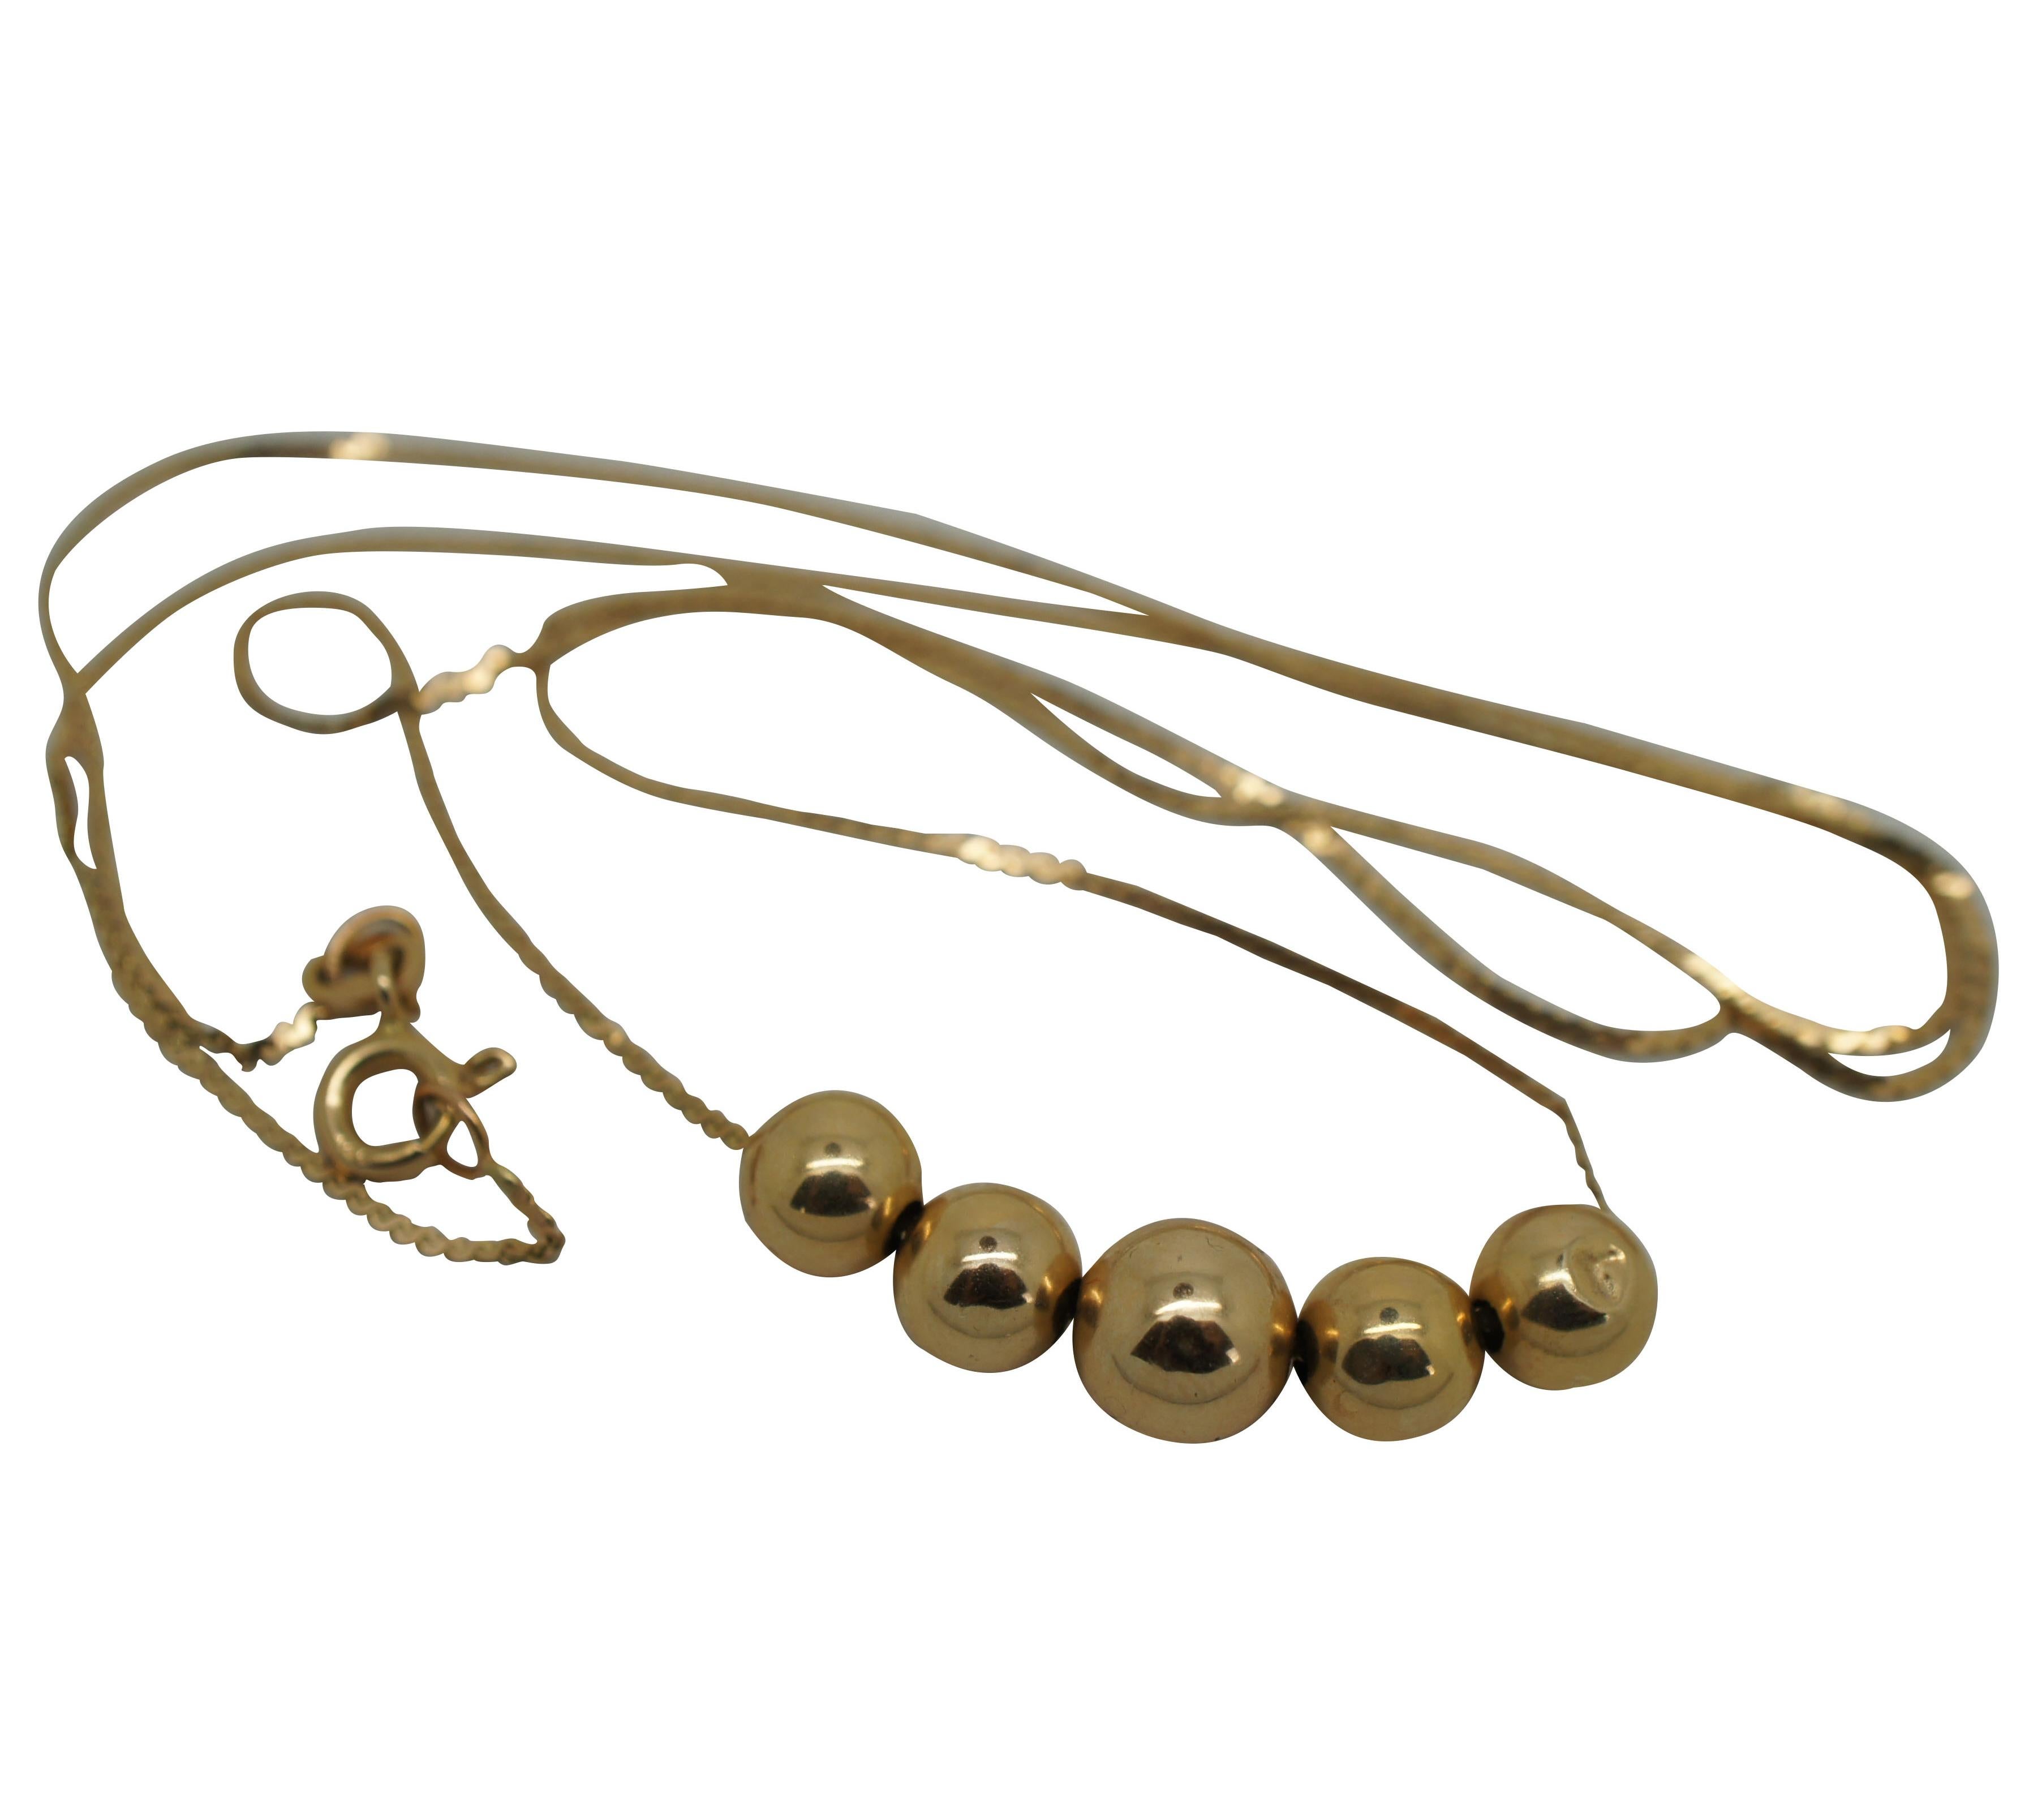 Vintage 14k yellow gold delicate serpentine chain statement necklace hung with five graduated round beads and spring ring clasp. Paired with simple hollow gold ball post back earrings. Made in Italy.

Necklace - 18” x 0.25” (Length x Width) /